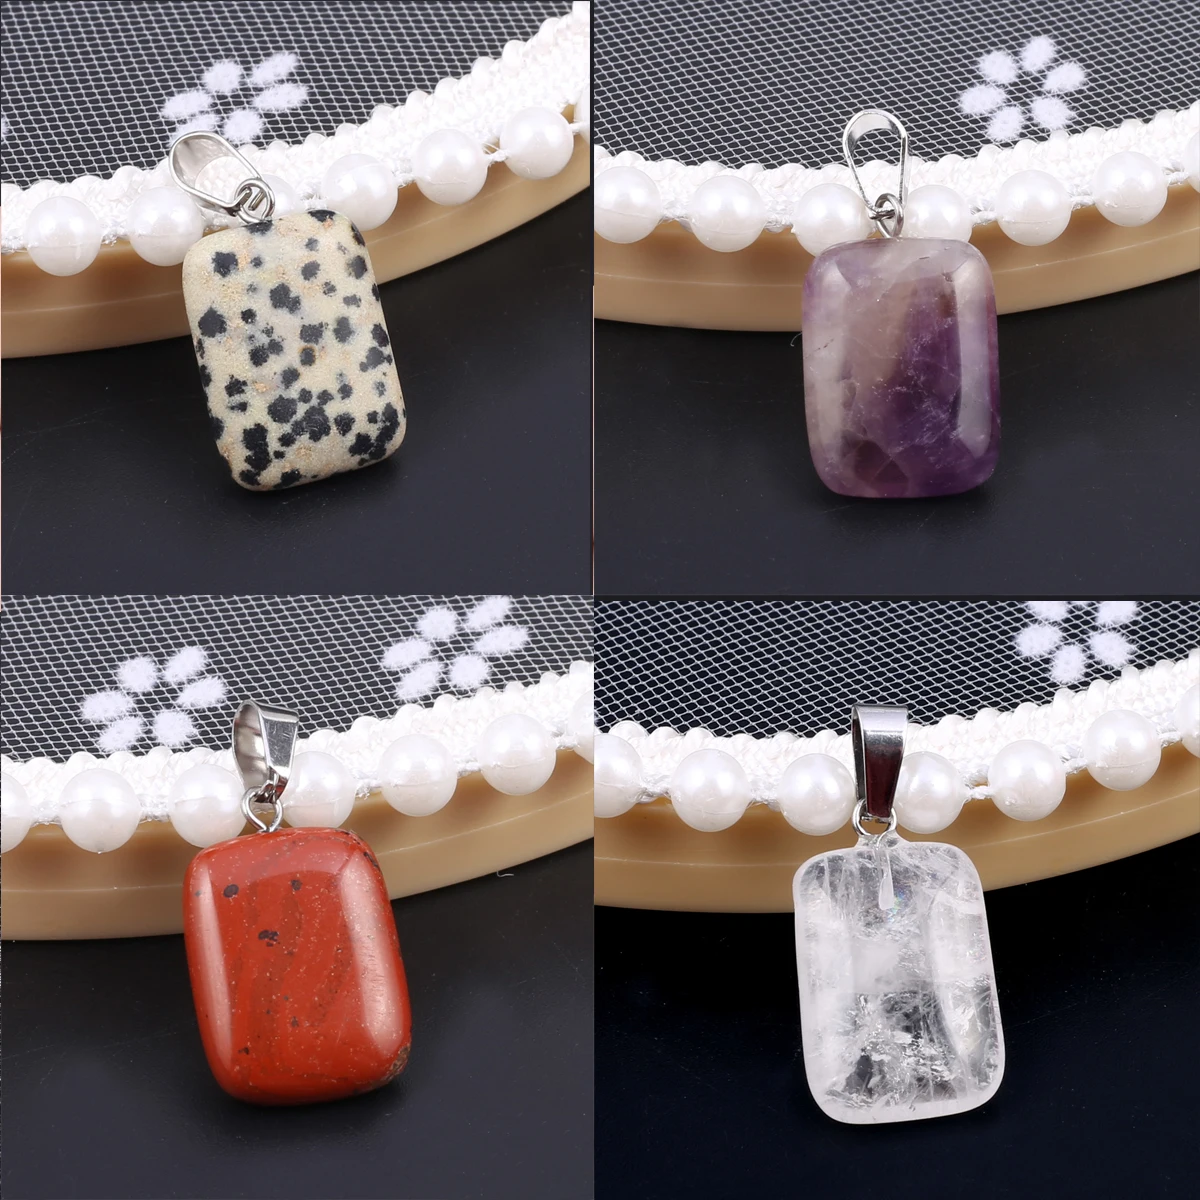 

5 PCS Rectangle Natural Stone Amethyst Turquoise Jade Pendant DIY Jewelry Making DIY Necklace Earrings Accessories Charm Gift